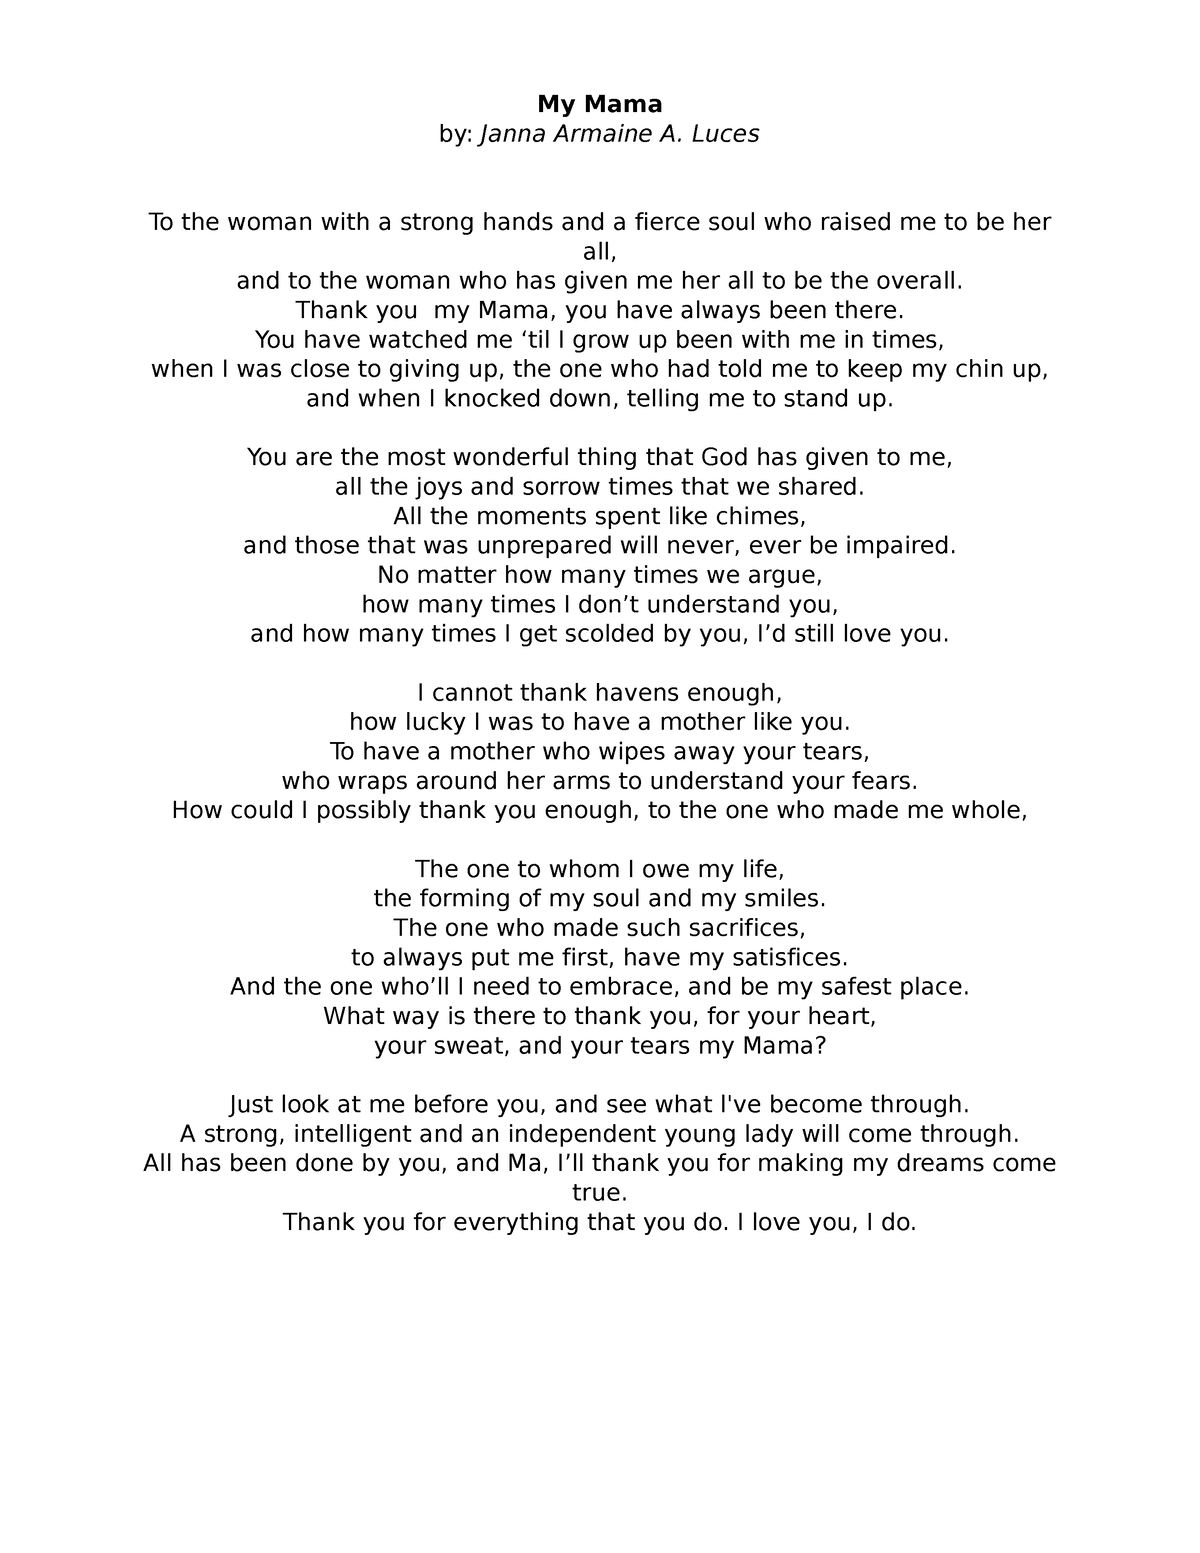 My Mama - poem - My Mama by: Janna Armaine A. Luces To the woman with a ...